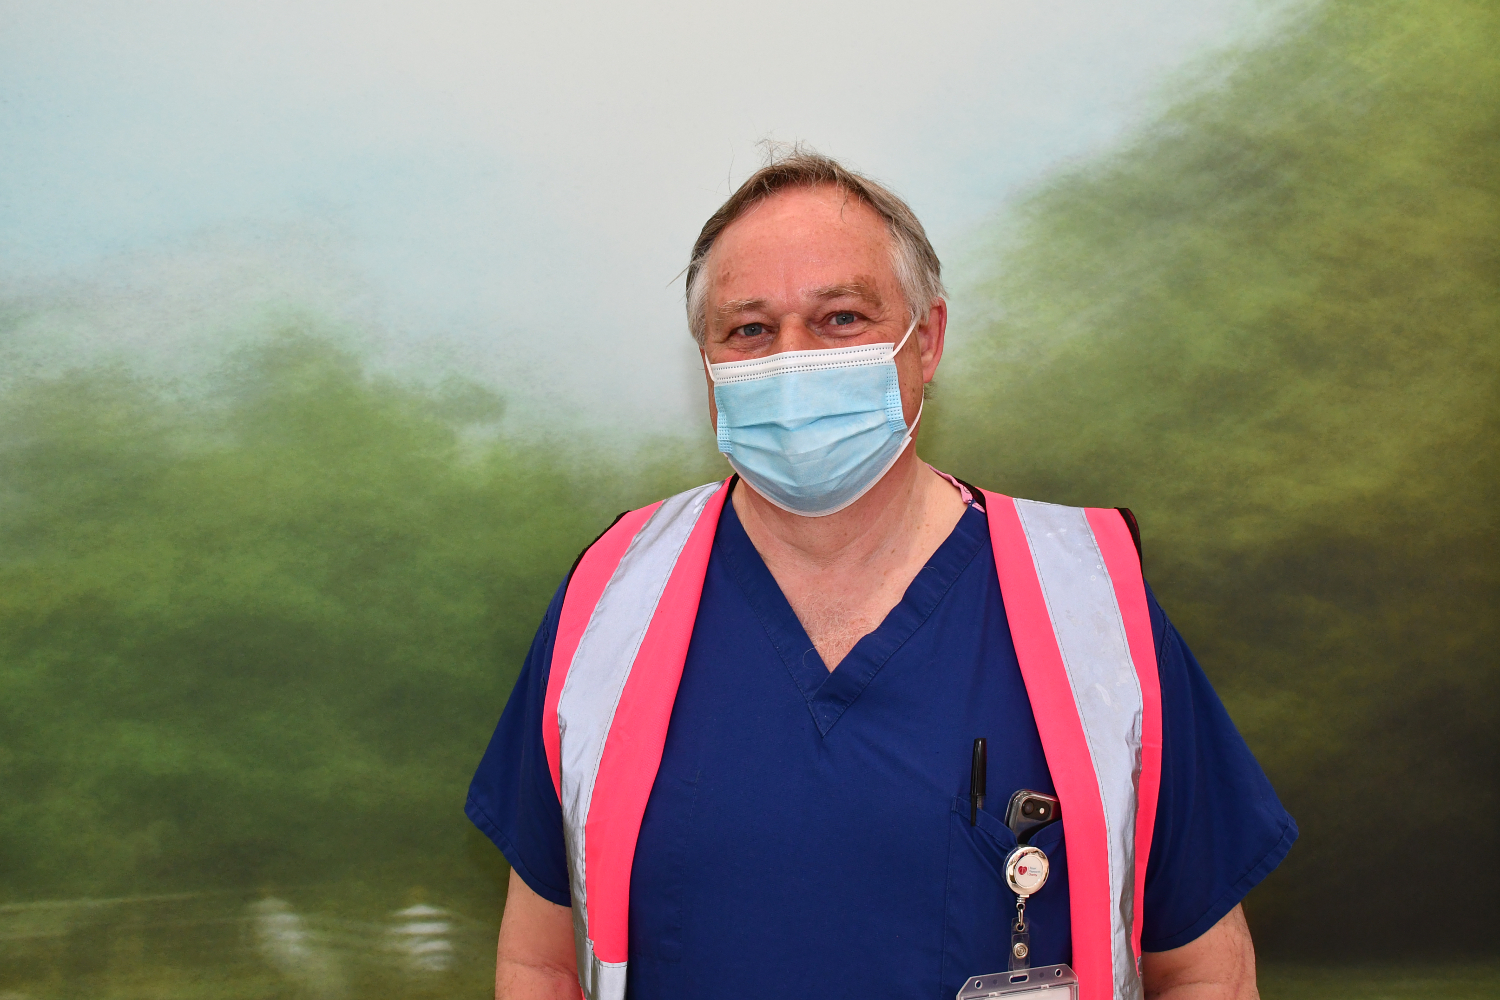 A person wearing a mask and blue scrubs with a pink high-vis vest.